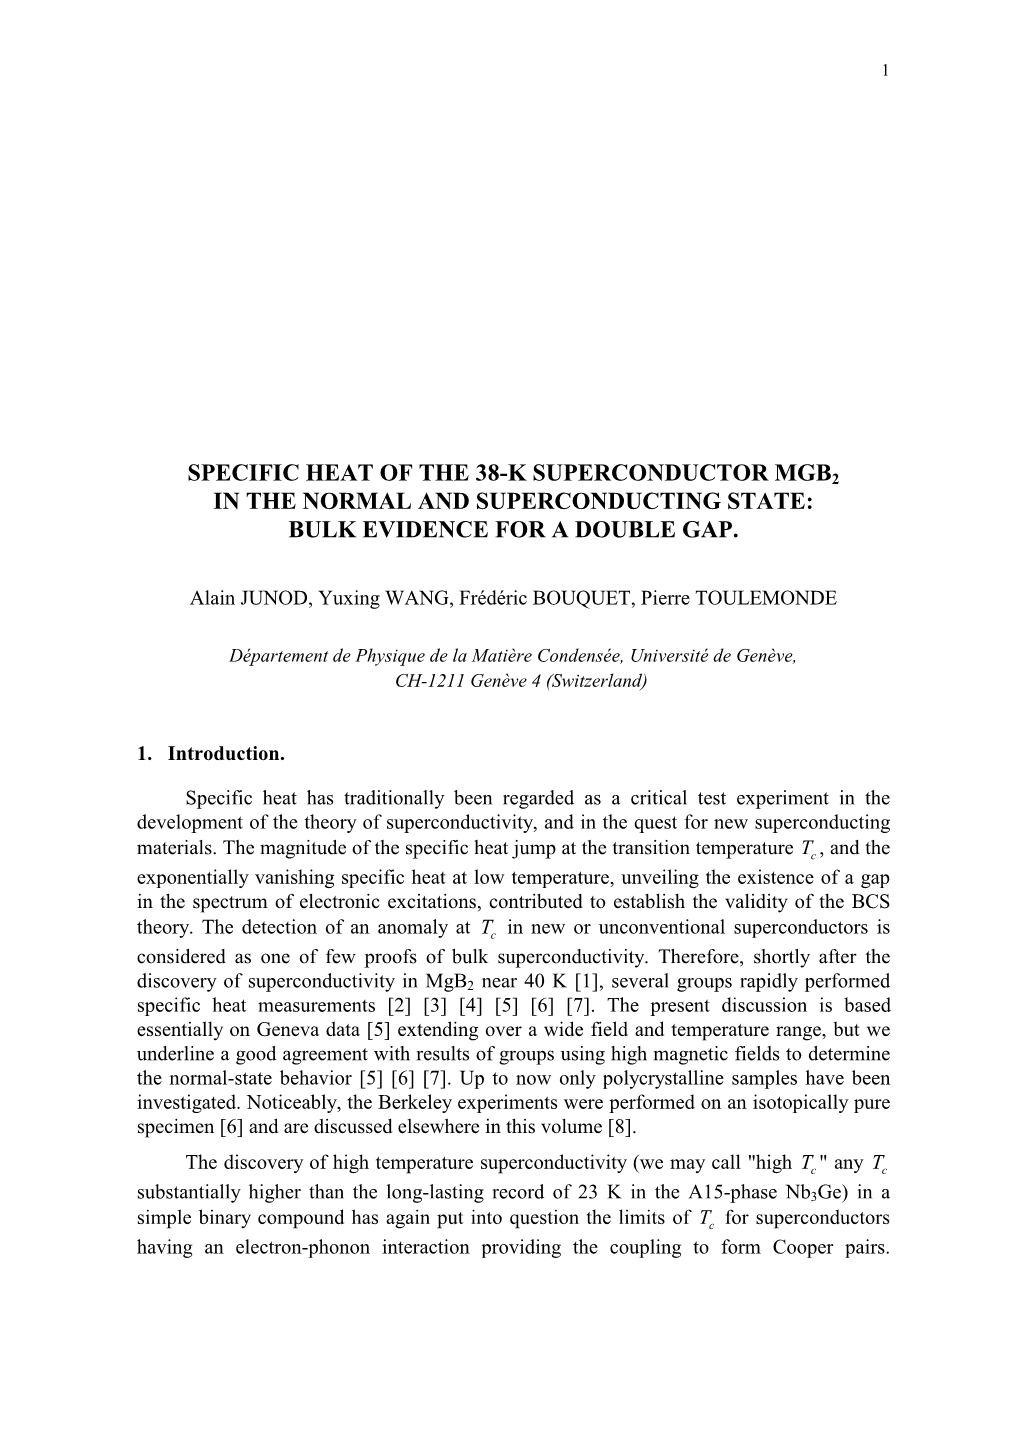 Specific Heat of the 38-K Superconductor Mgb2 in the Normal and Superconducting State: Bulk Evidence for a Double Gap